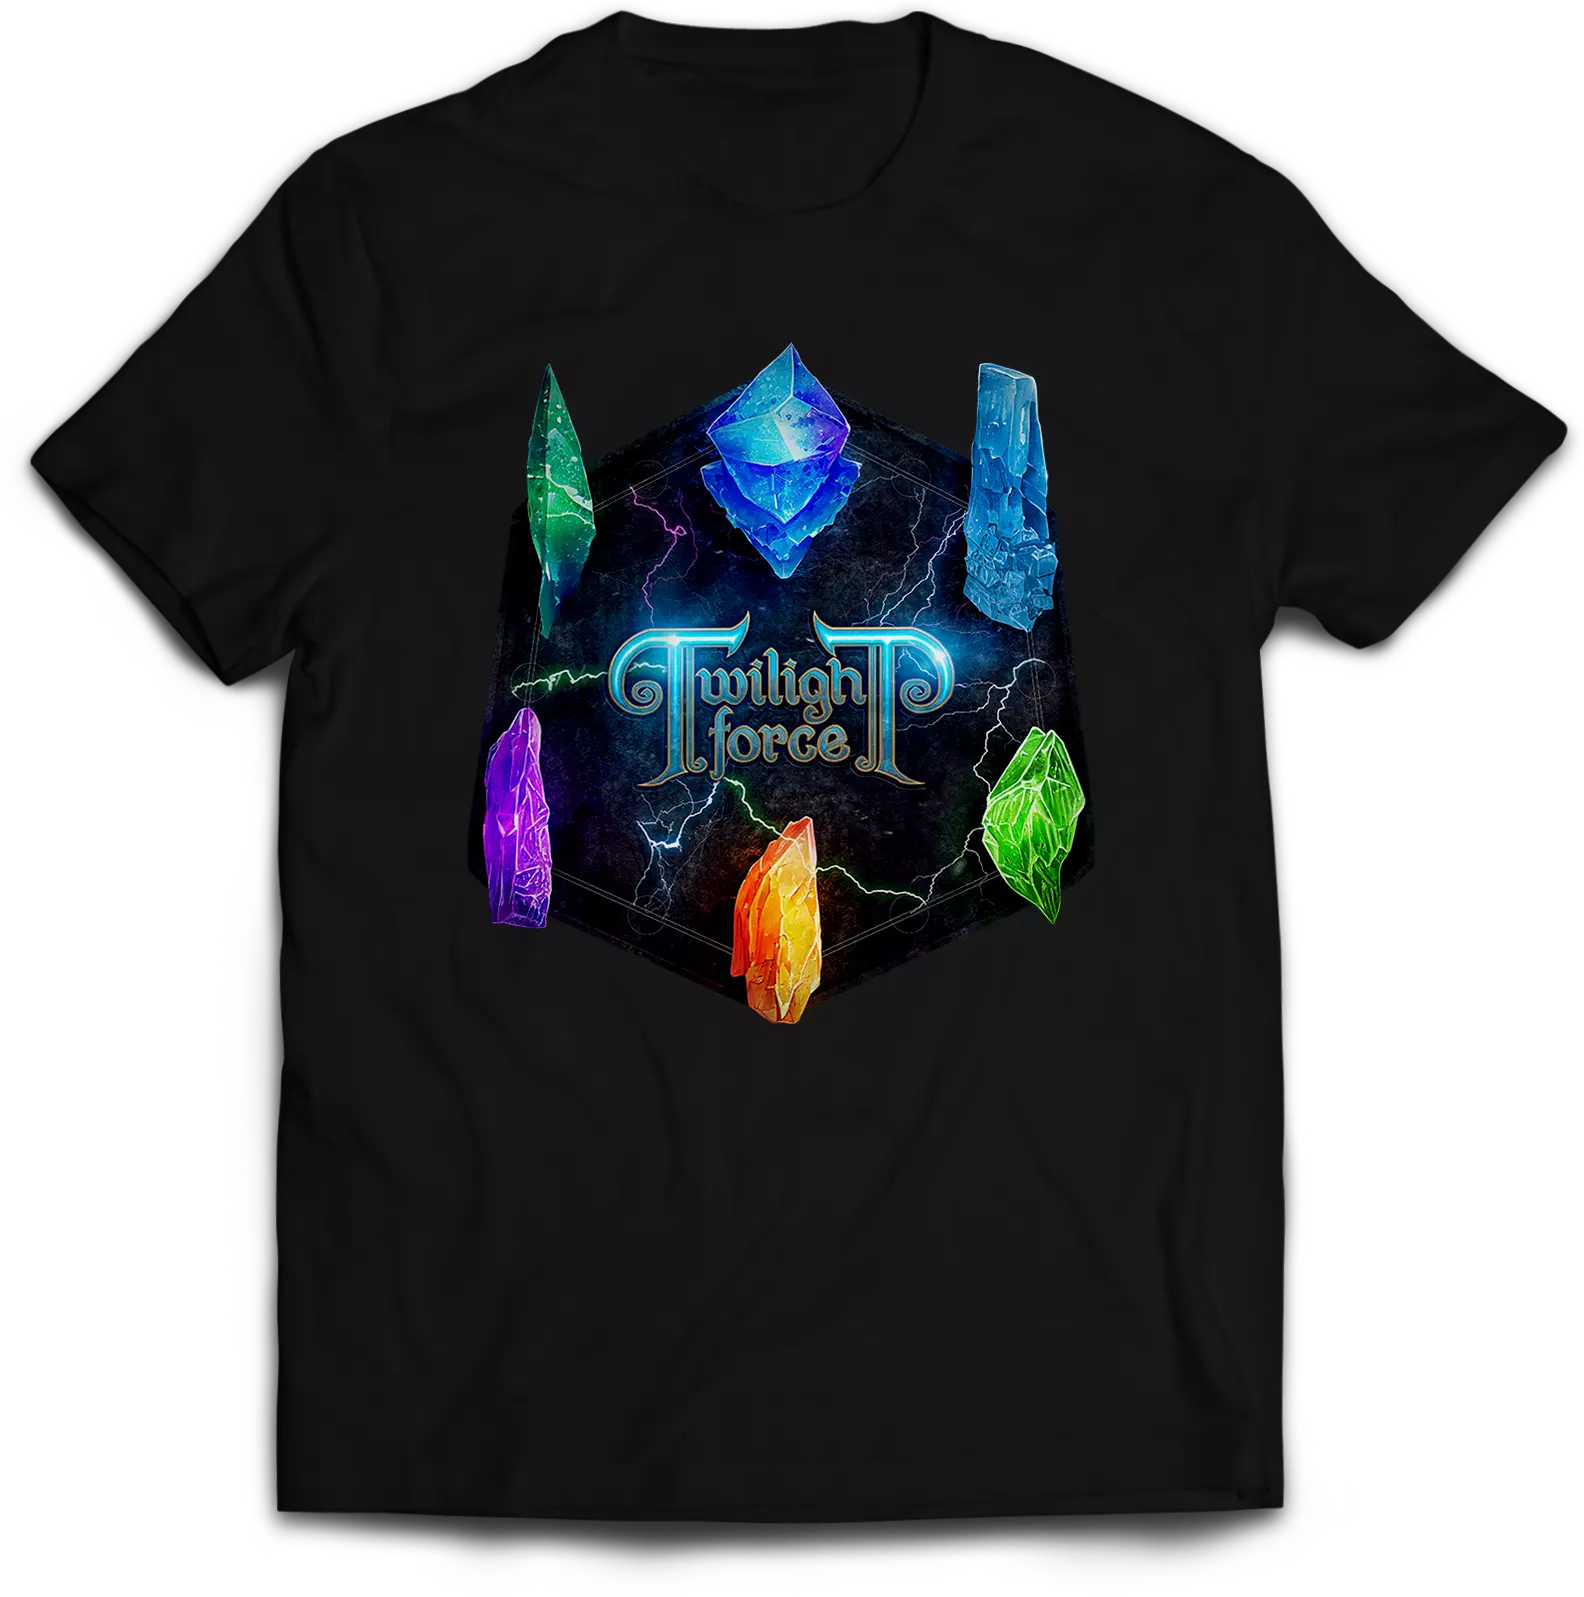 TWILIGHT FORCE - Crystals [T-SHIRT]